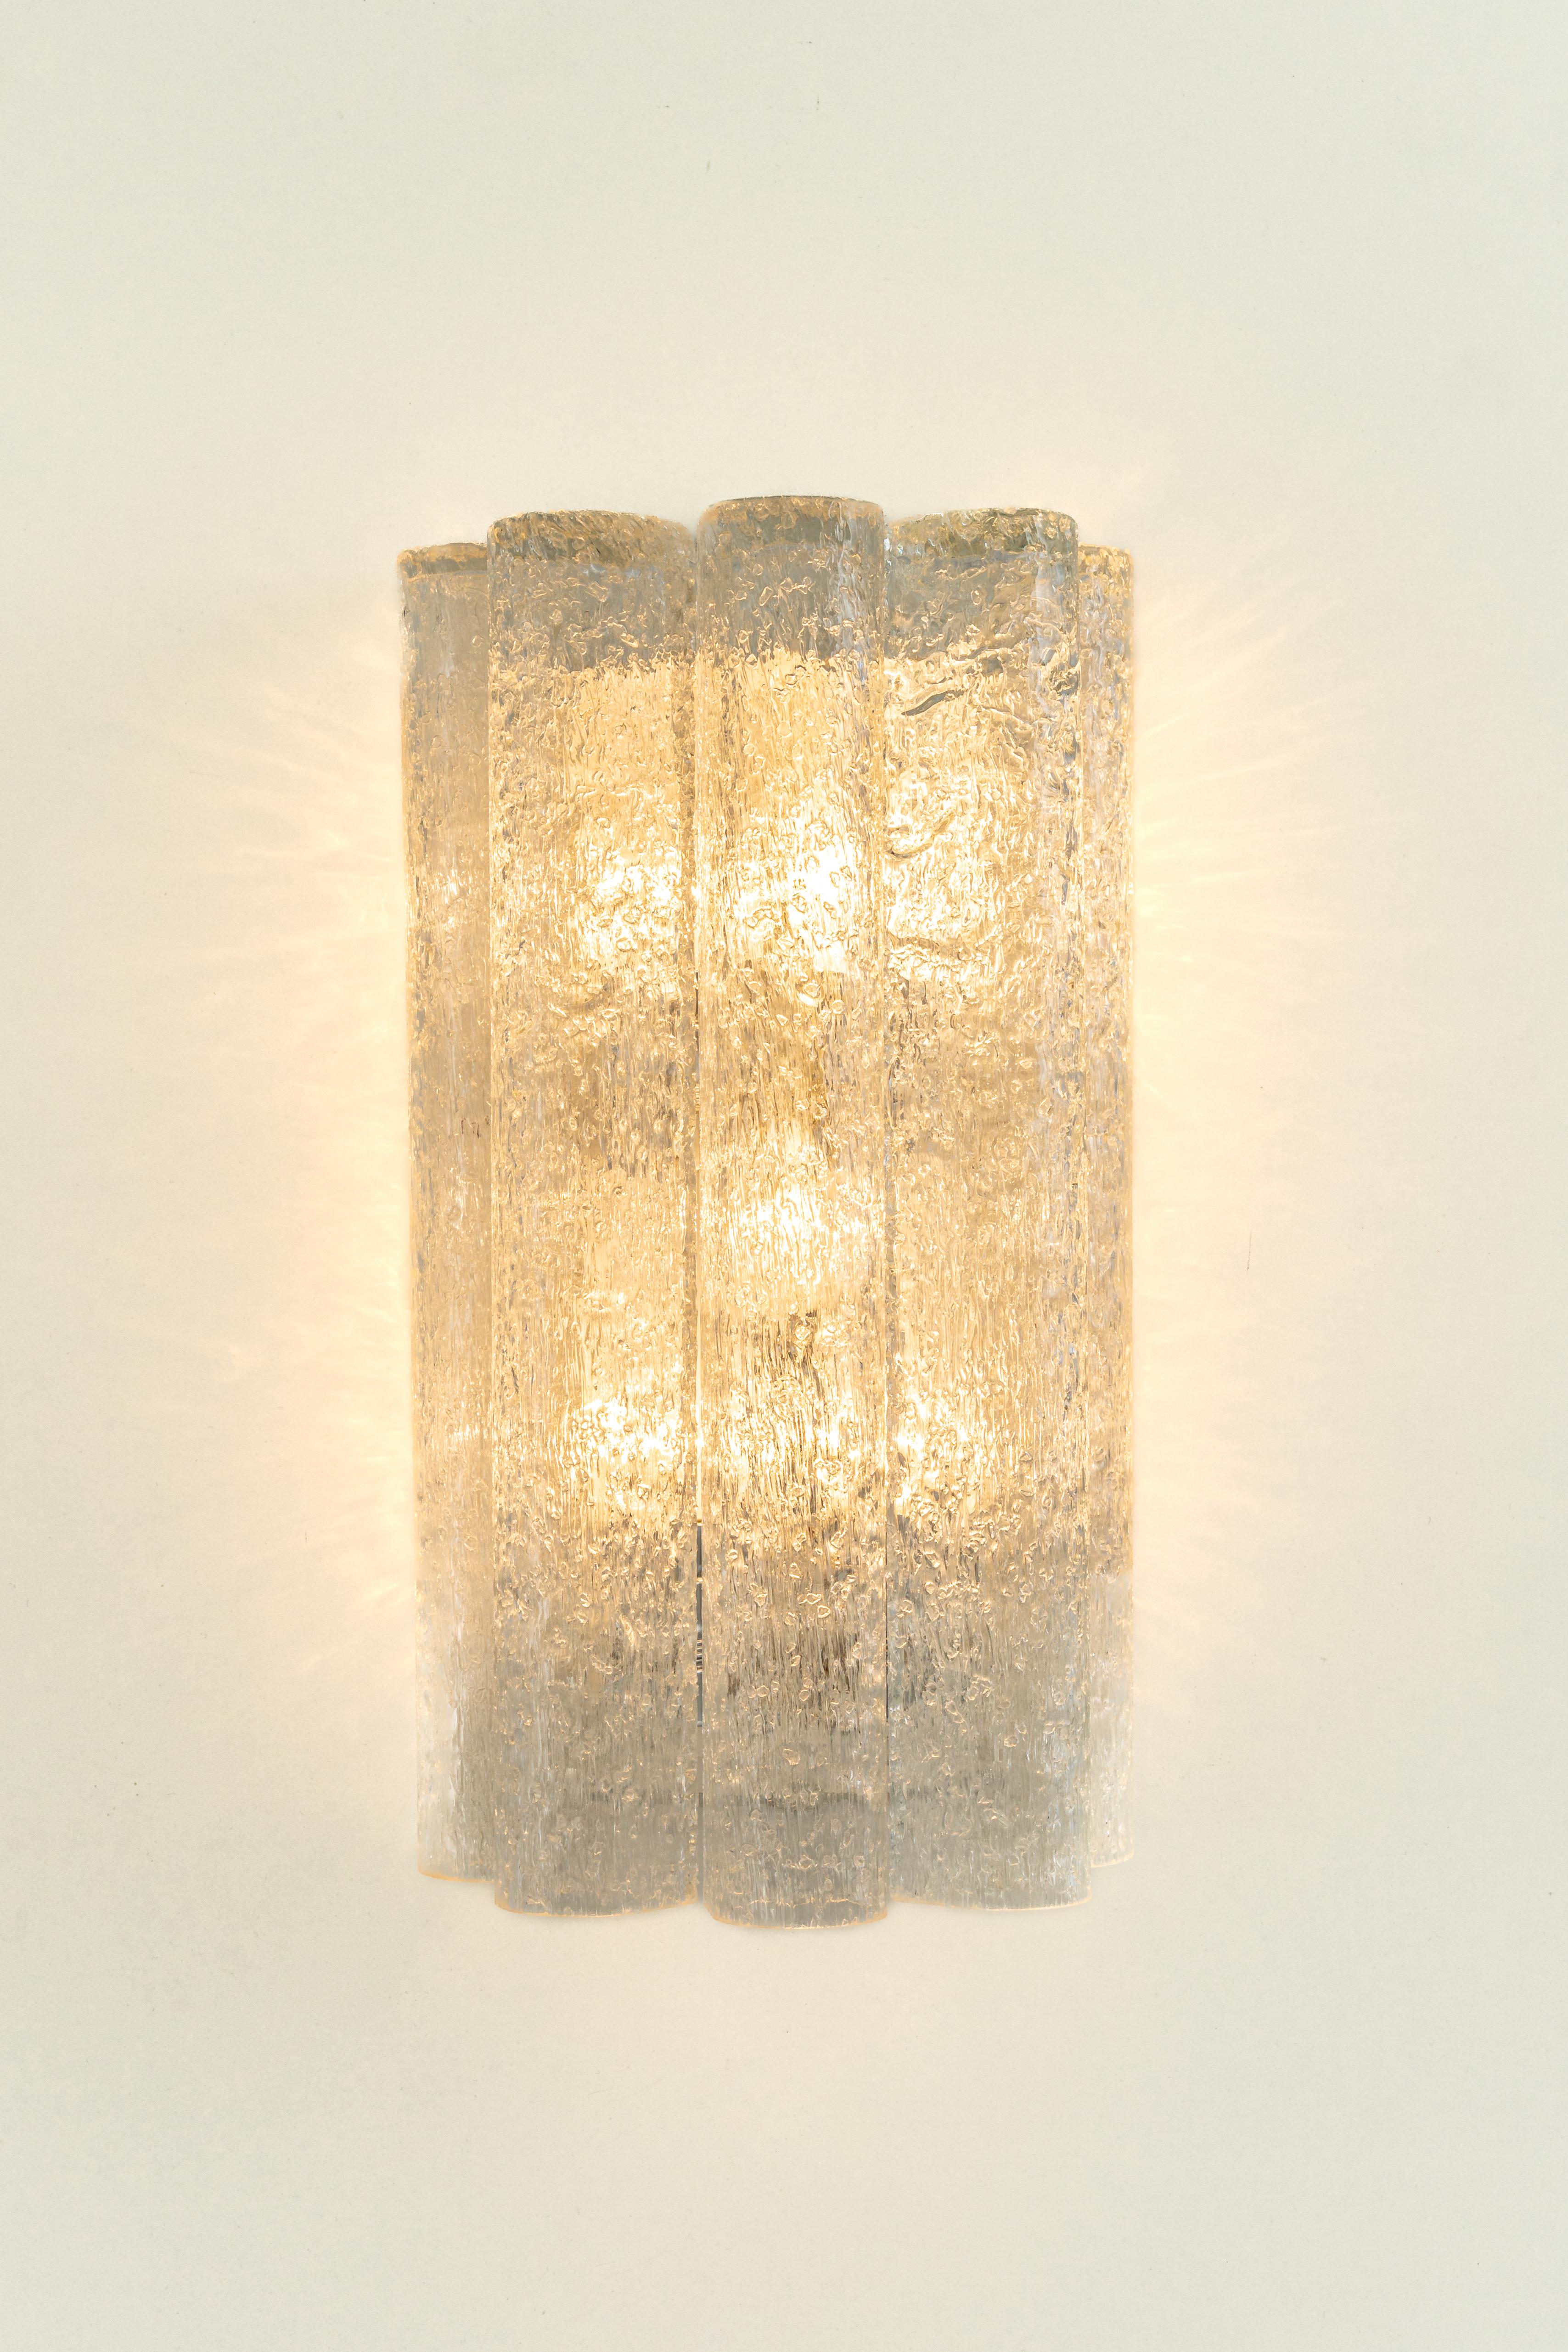 1 of 8 Sets /Large Pair of murano Glass Wall Sconces by Doria, Germany, 1960s For Sale 4